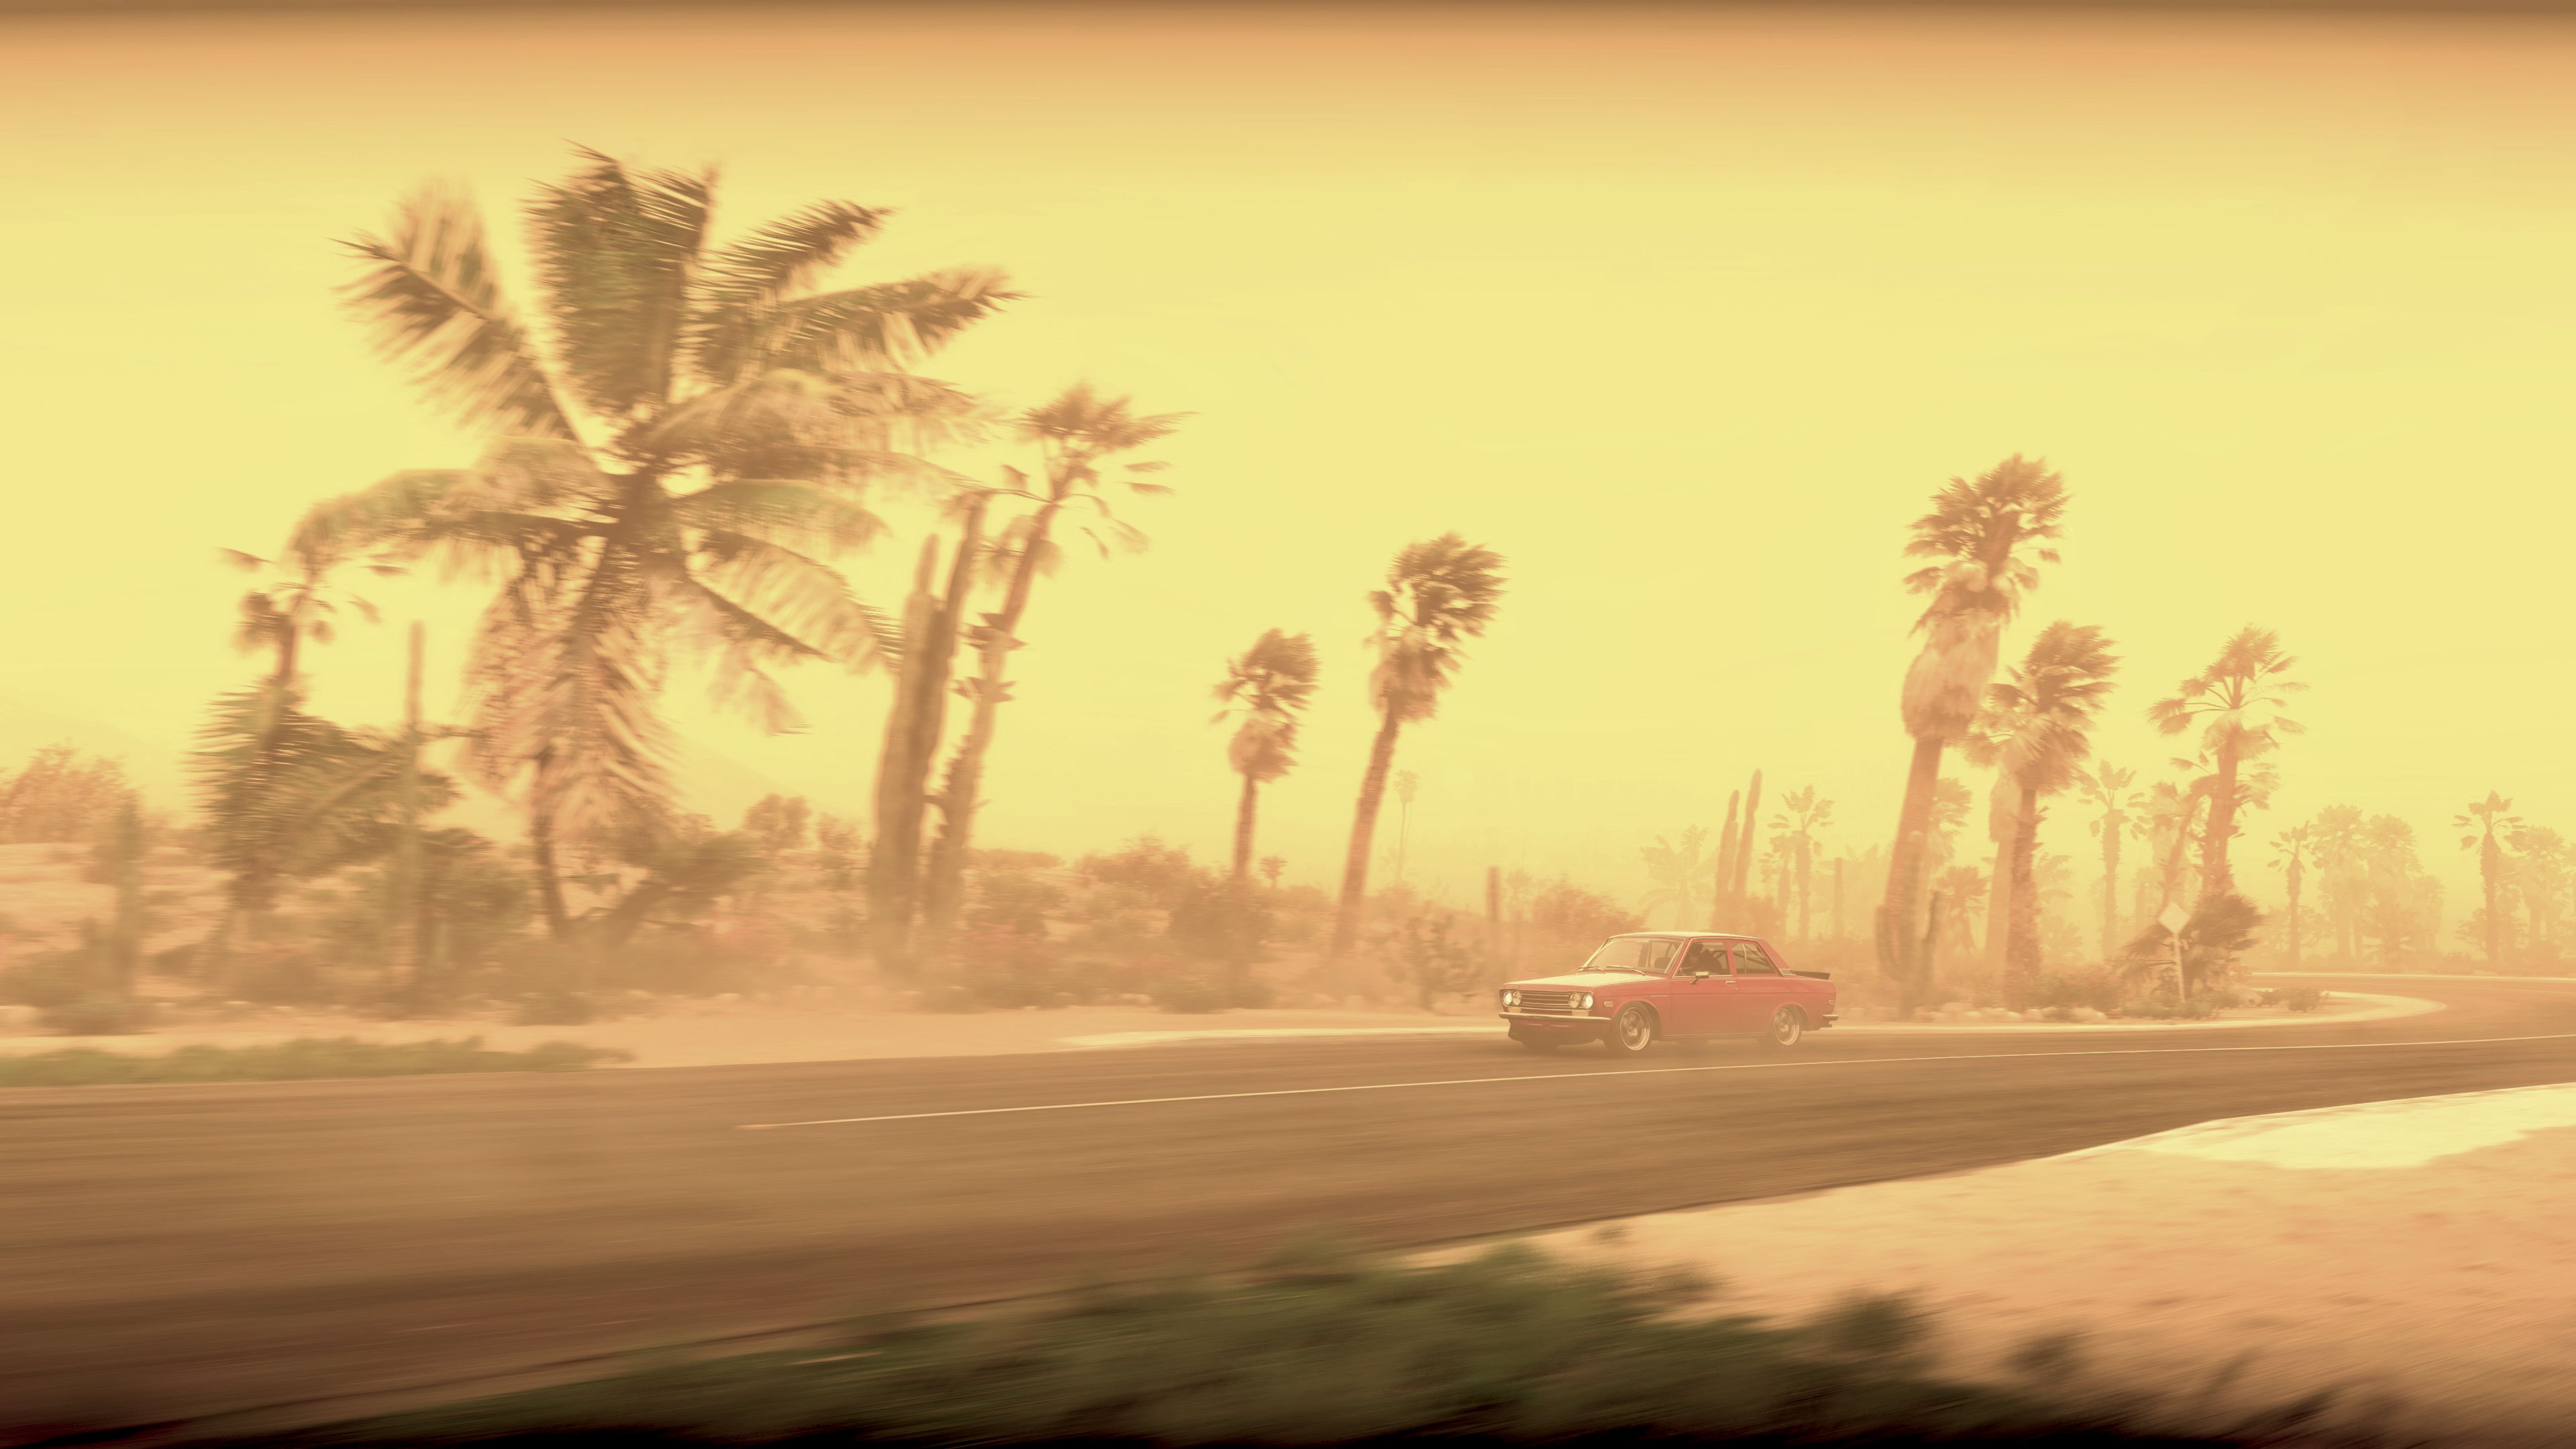 Another screenshot of the same Datsun 510, this time in a different spot. There a bunch of foliage and palm trees on the side of the road being buffeted by extreme winds, the entire scene is yellow and the visibility is extremely low because I'm in the middle of a huge dust storm.